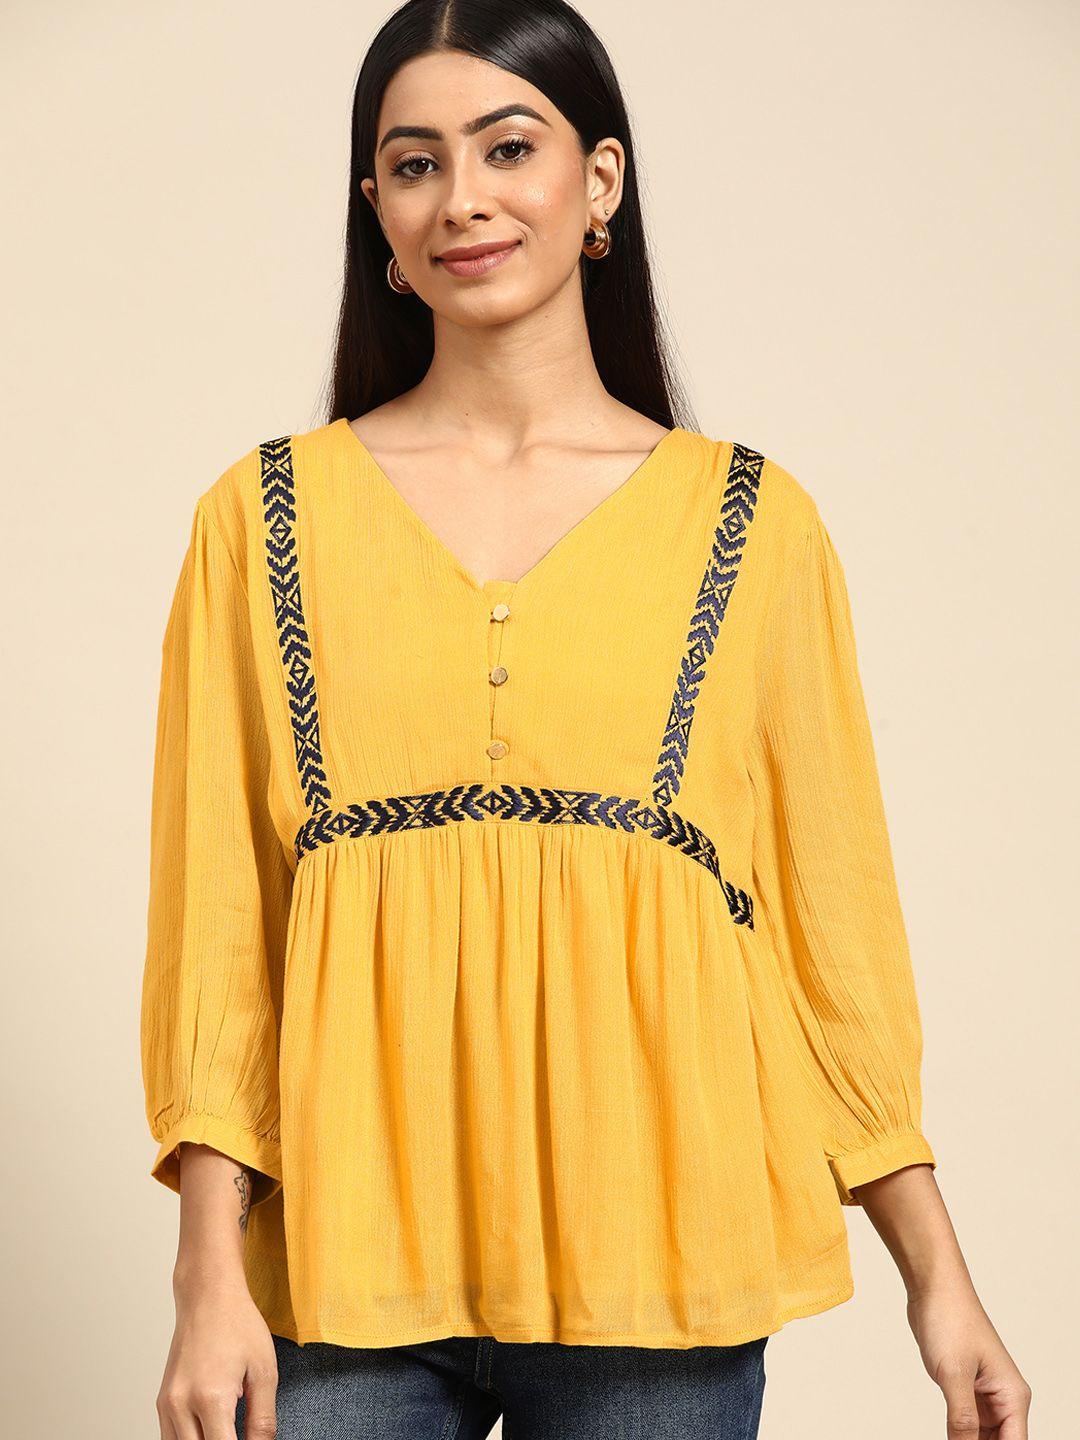 all-about-you-mustard-yellow-&-purple-geometric-embroidered-top